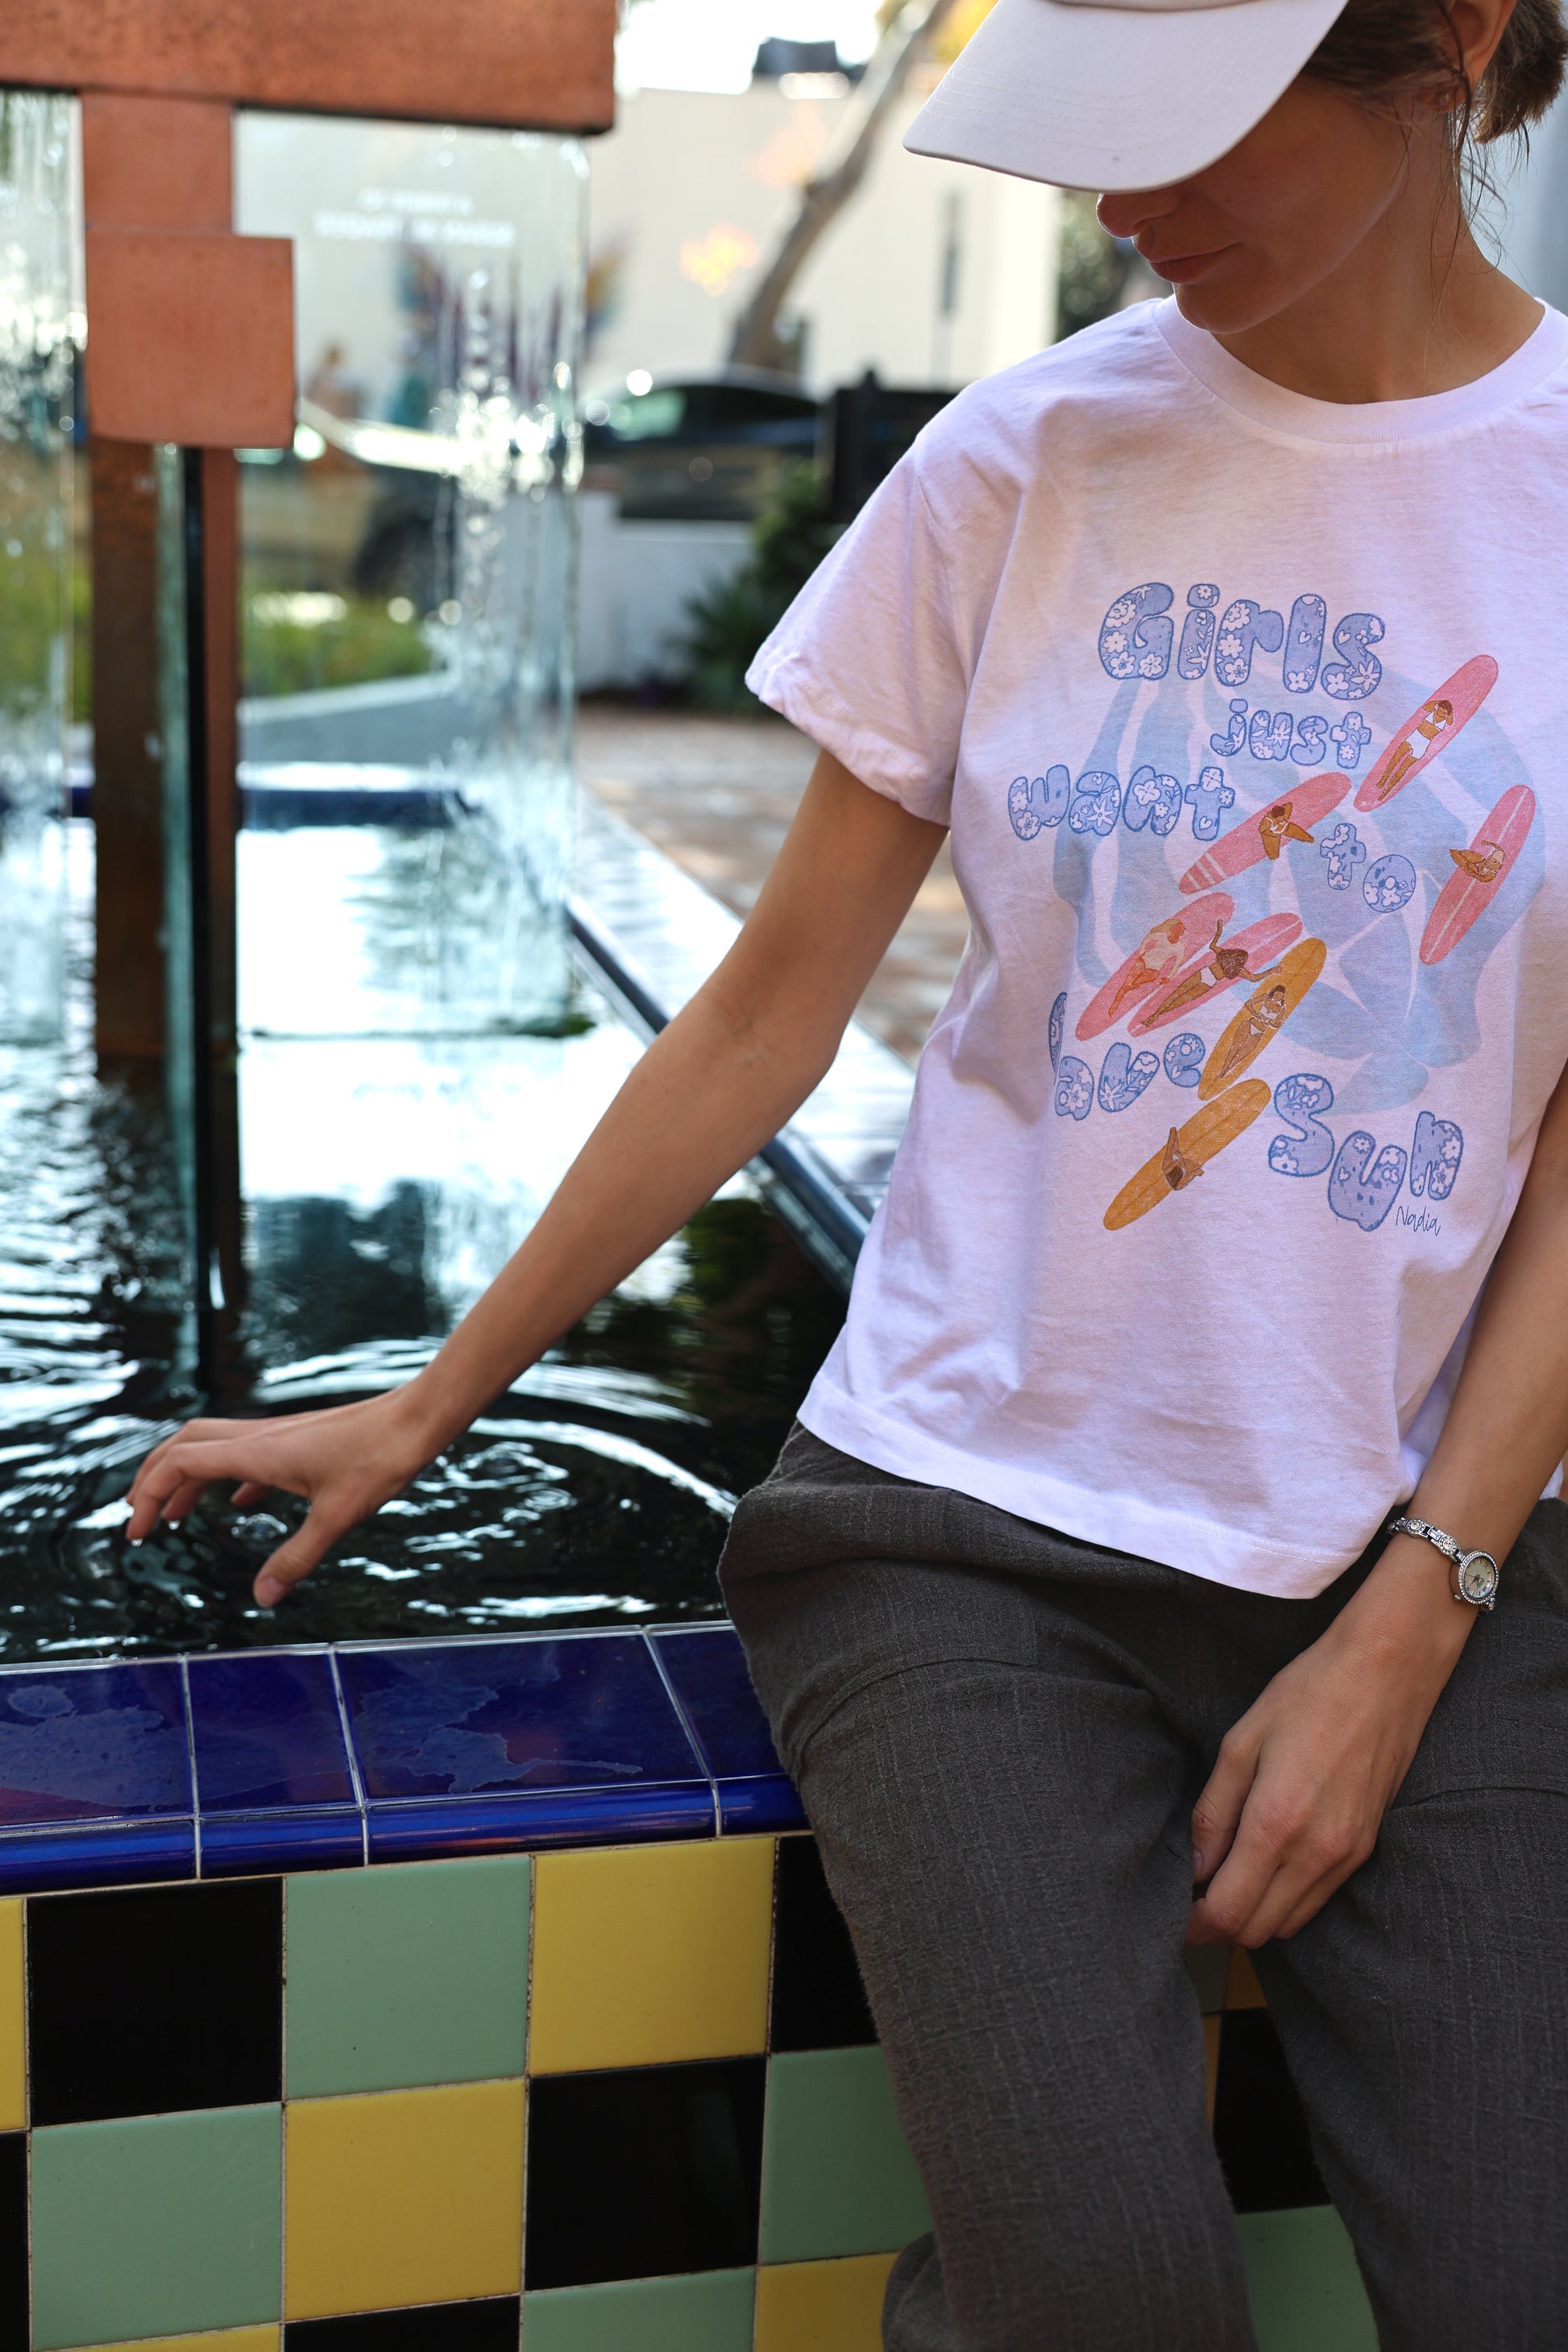 Girls Just Want to Have Sun Surfer Girls on surfboards illustrated graphic tee by Nadia Watts